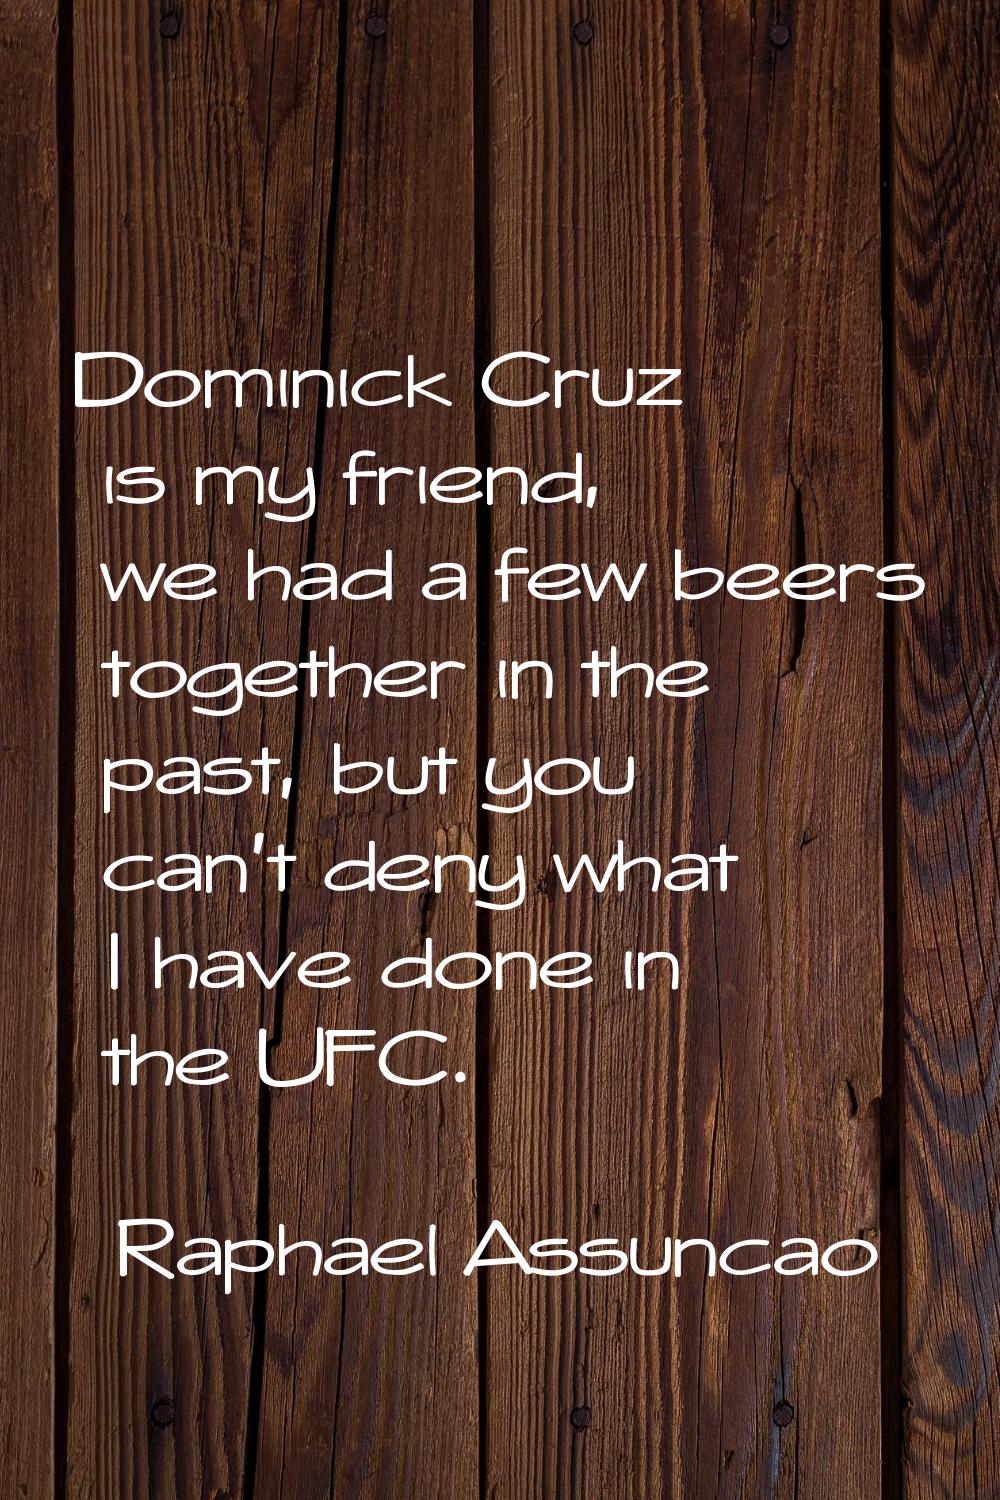 Dominick Cruz is my friend, we had a few beers together in the past, but you can't deny what I have